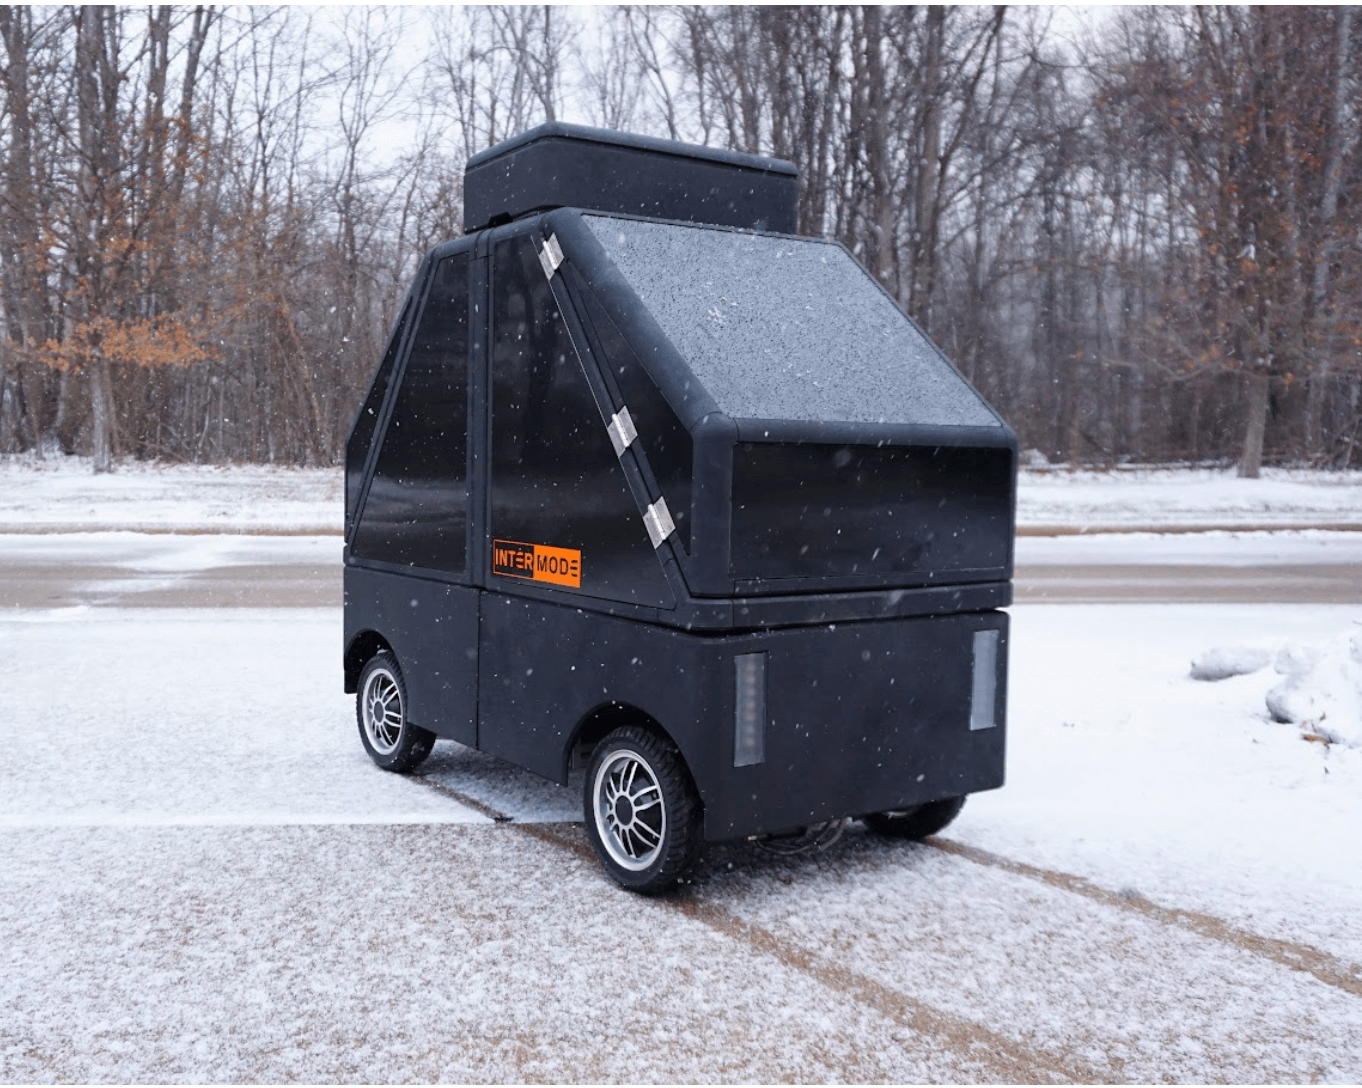 A large black intermode rover controlled with CANBUS protocol chilling outside in the snow.